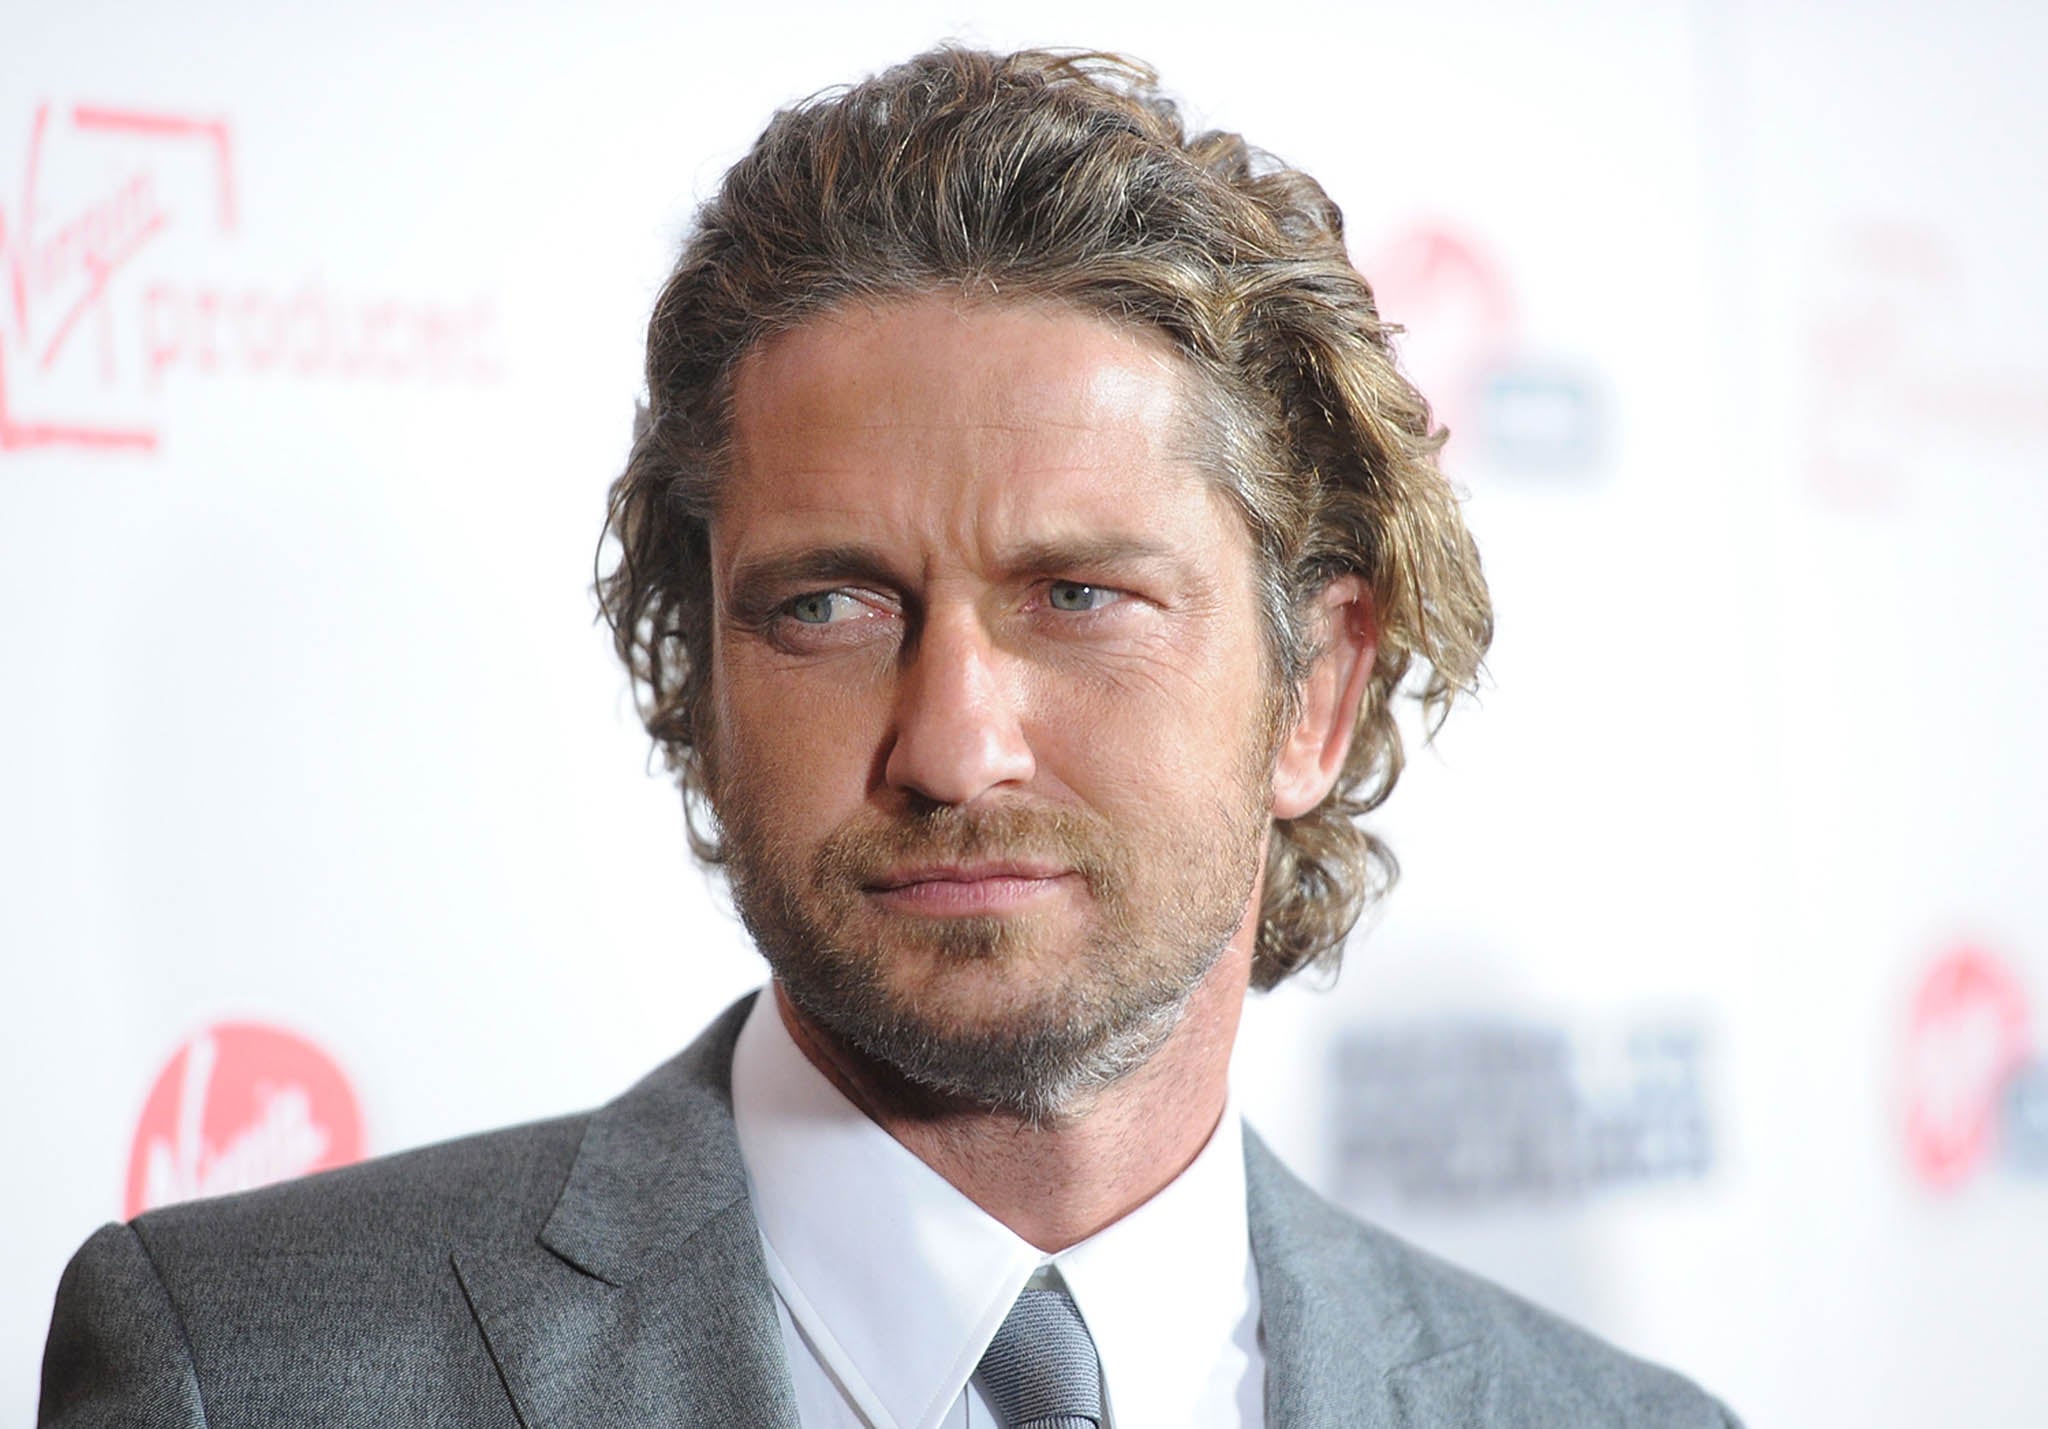 Gerard Butler has reportedly dropped out of the Point Break remake